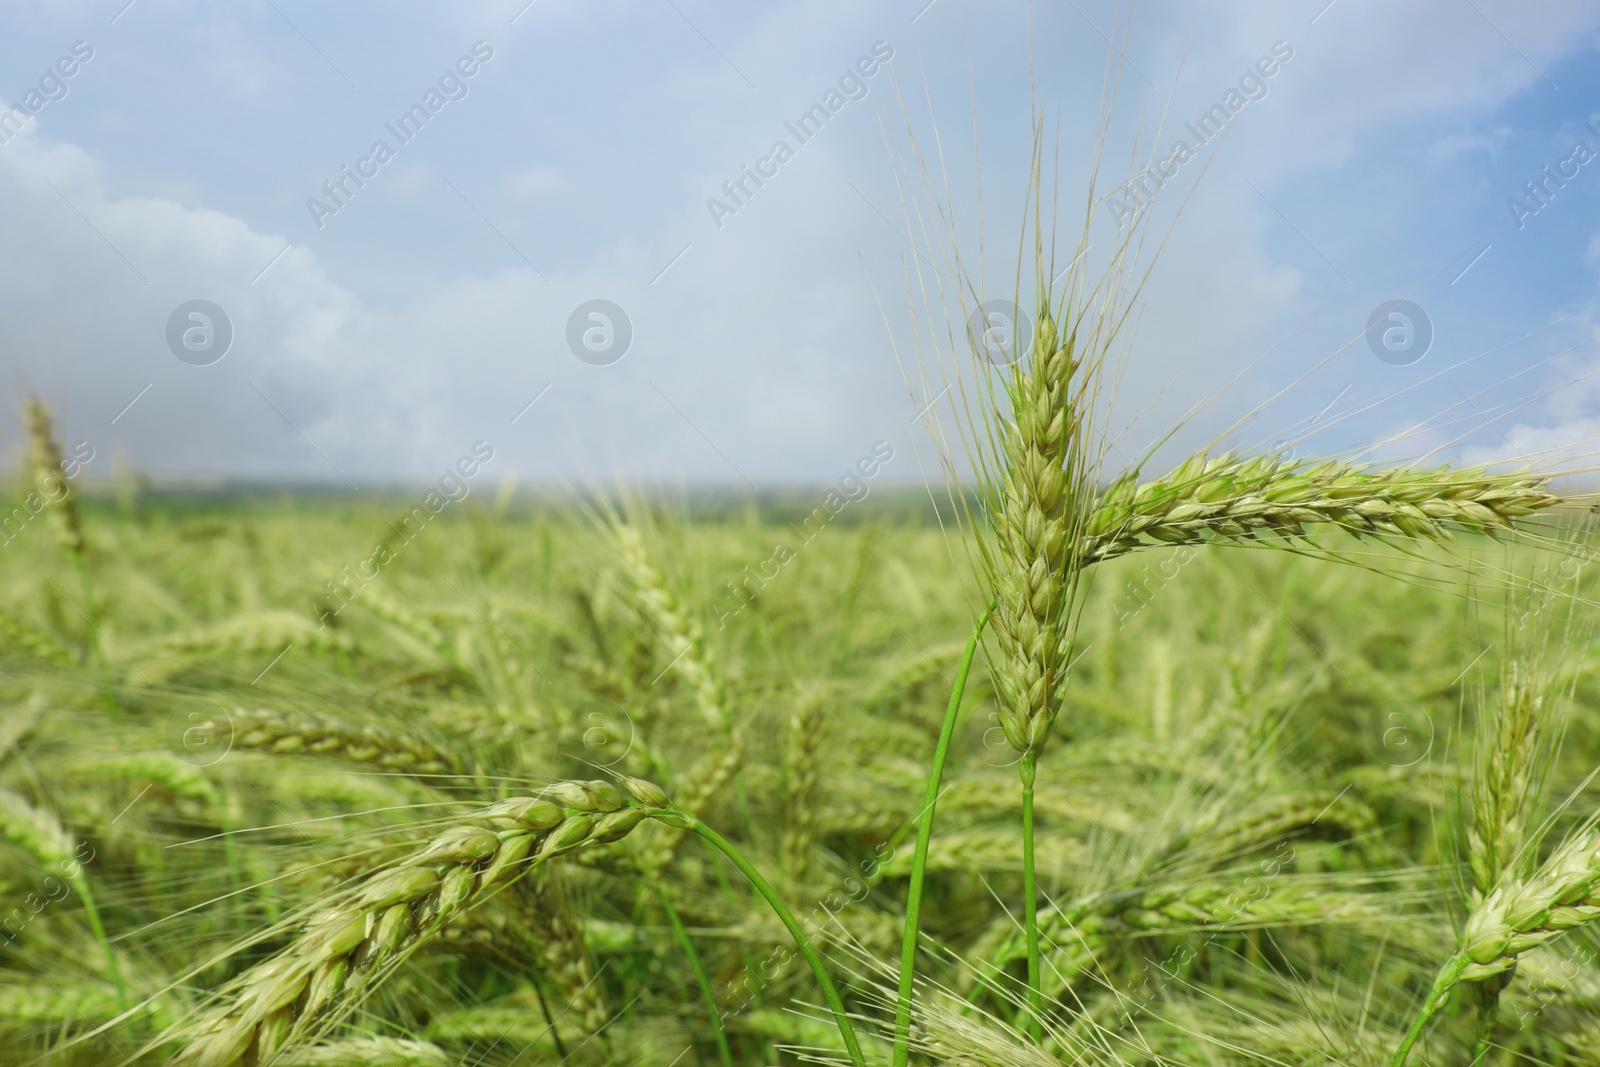 Photo of Closeup view of agricultural field with ripening wheat crop